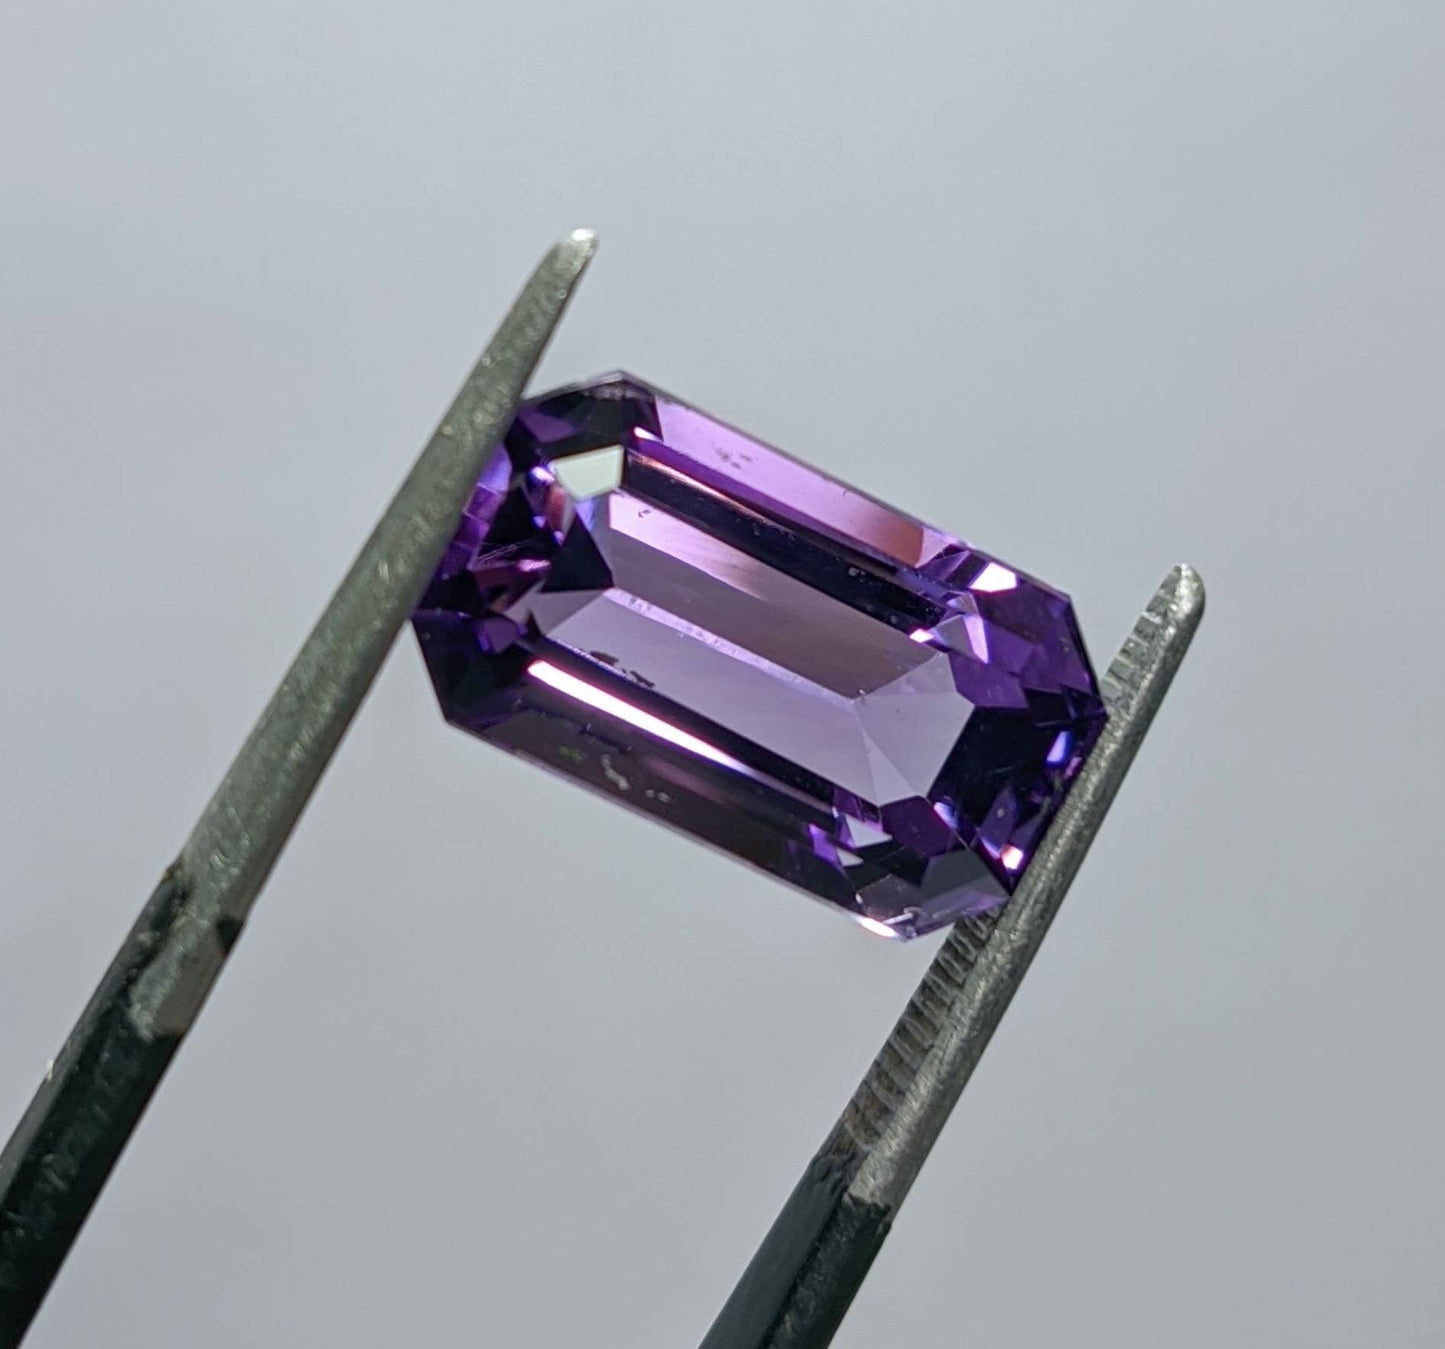 ARSAA GEMS AND MINERALSNatural fine quality beautiful 5 carats deep purple color AAA clarity faceted amethyst gem - Premium  from ARSAA GEMS AND MINERALS - Just $12.00! Shop now at ARSAA GEMS AND MINERALS